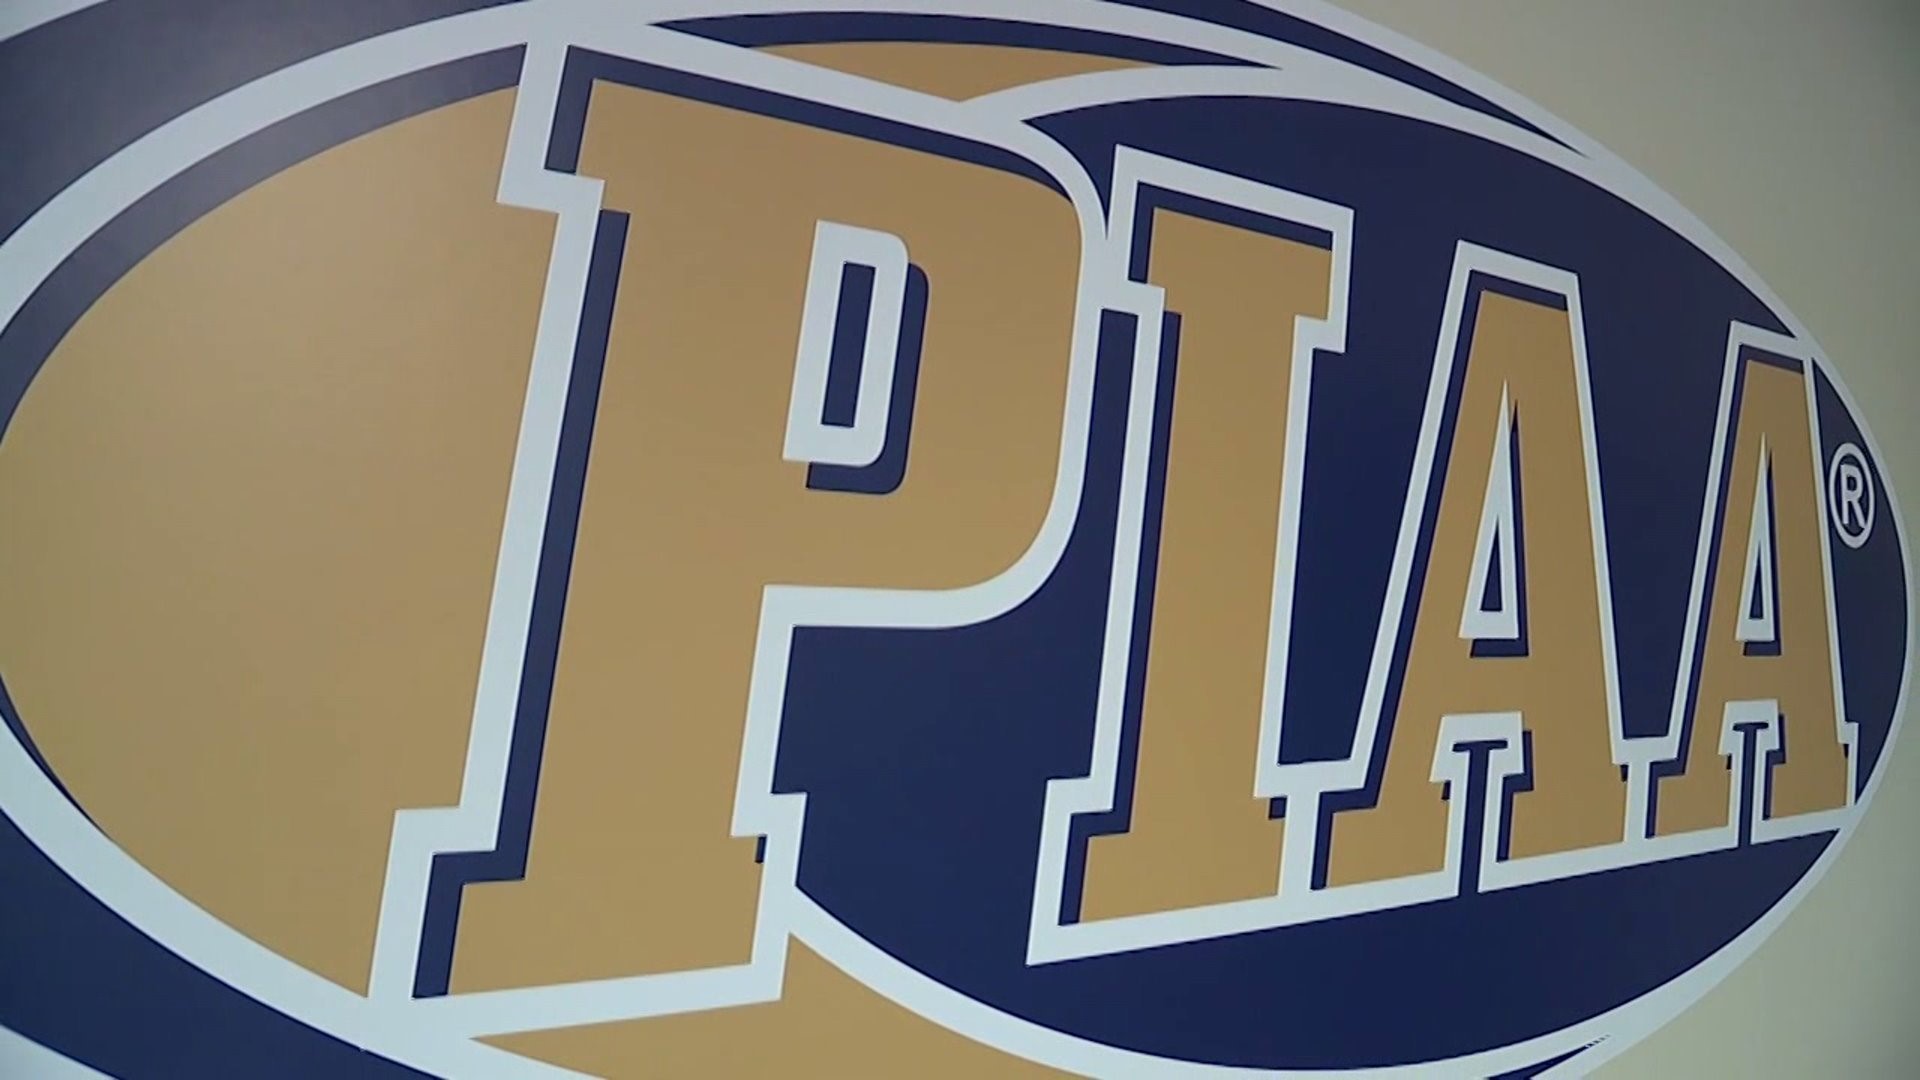 The guidelines are a step in the right direction for Pennsylvania high school sports.